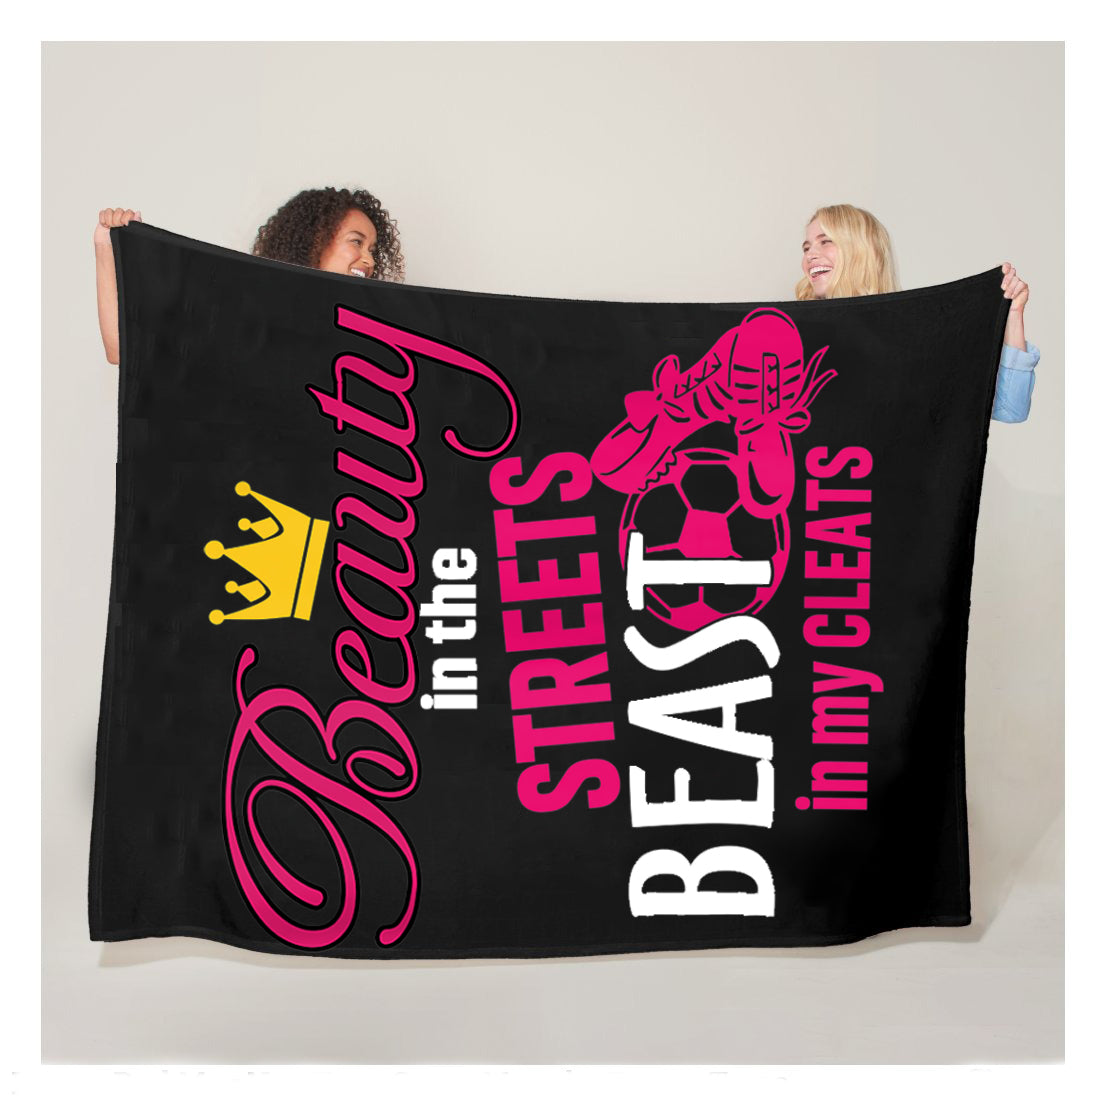 Beauty In The Streets Beast In My Cleats Funny Girls Soccer Sherpa Blanket,  Soccer Outdoor Blankets, Soccer Gifts For Coach And Soccer Players, Birthday Gift For Soccer Player